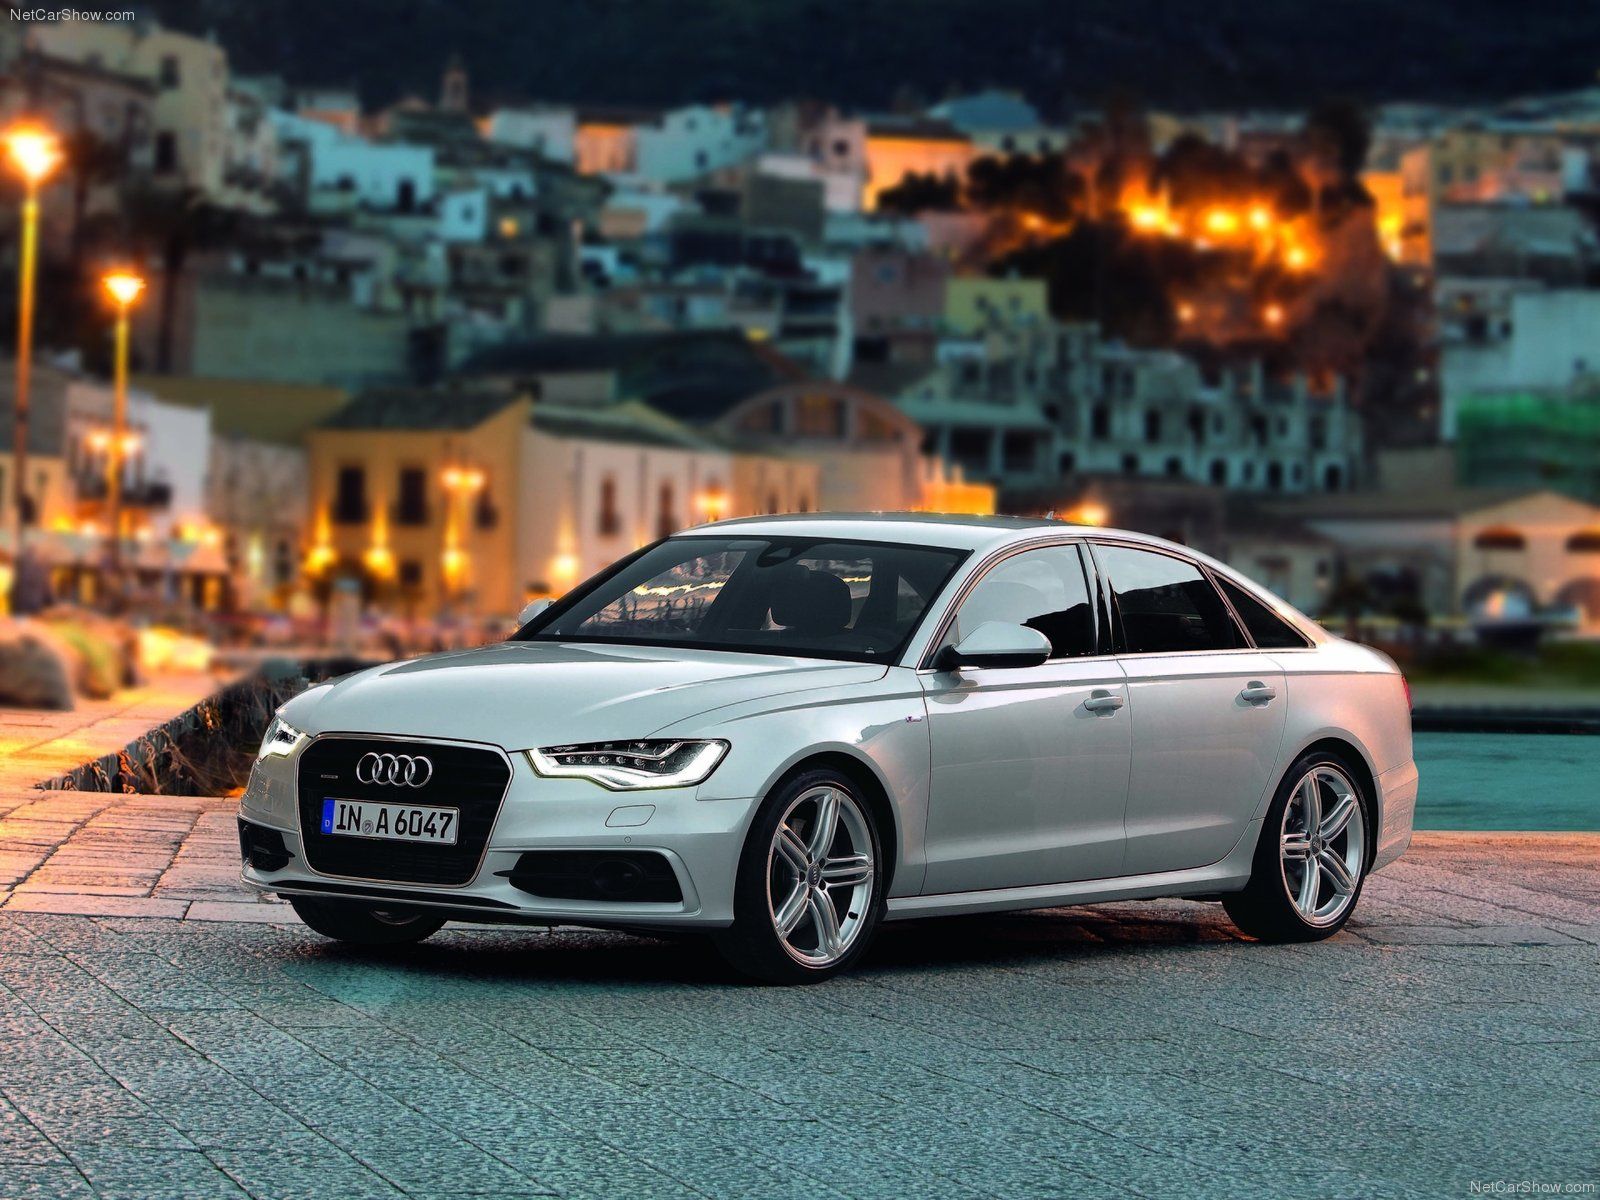 Free download Audi A6 Wallpaper Full HD Picture [1600x1200]